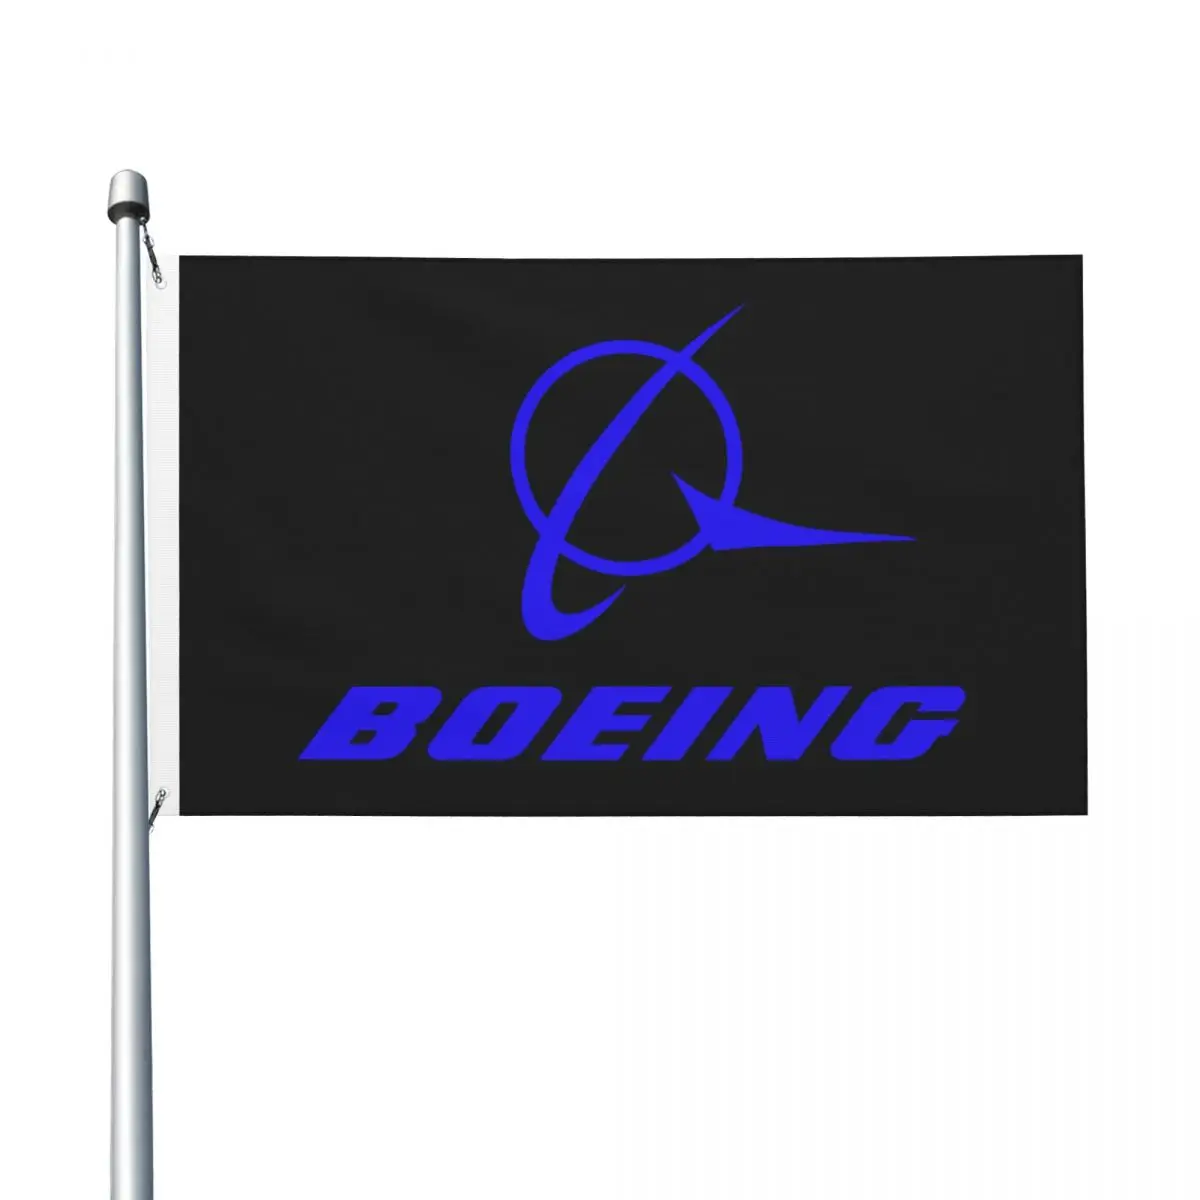 

Boeing Double Sided Banner Breeze Flag Garden Flag Decorative Flag Party Banner 3x5FT (90x150cm)